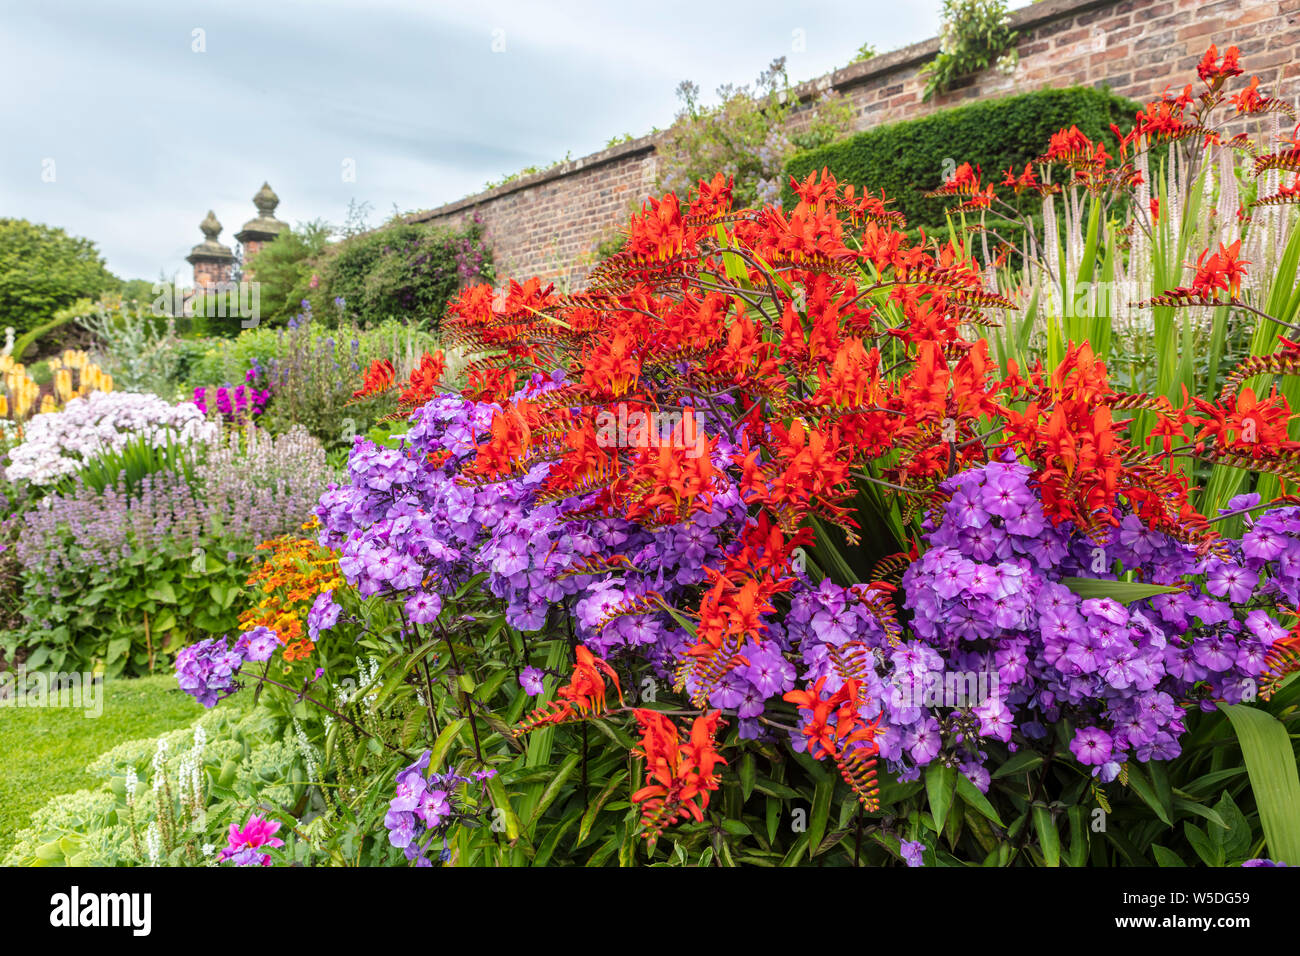 Deep red Crocosmia and purple Phlox flowering plants in a garden herbaceous border. Stock Photo